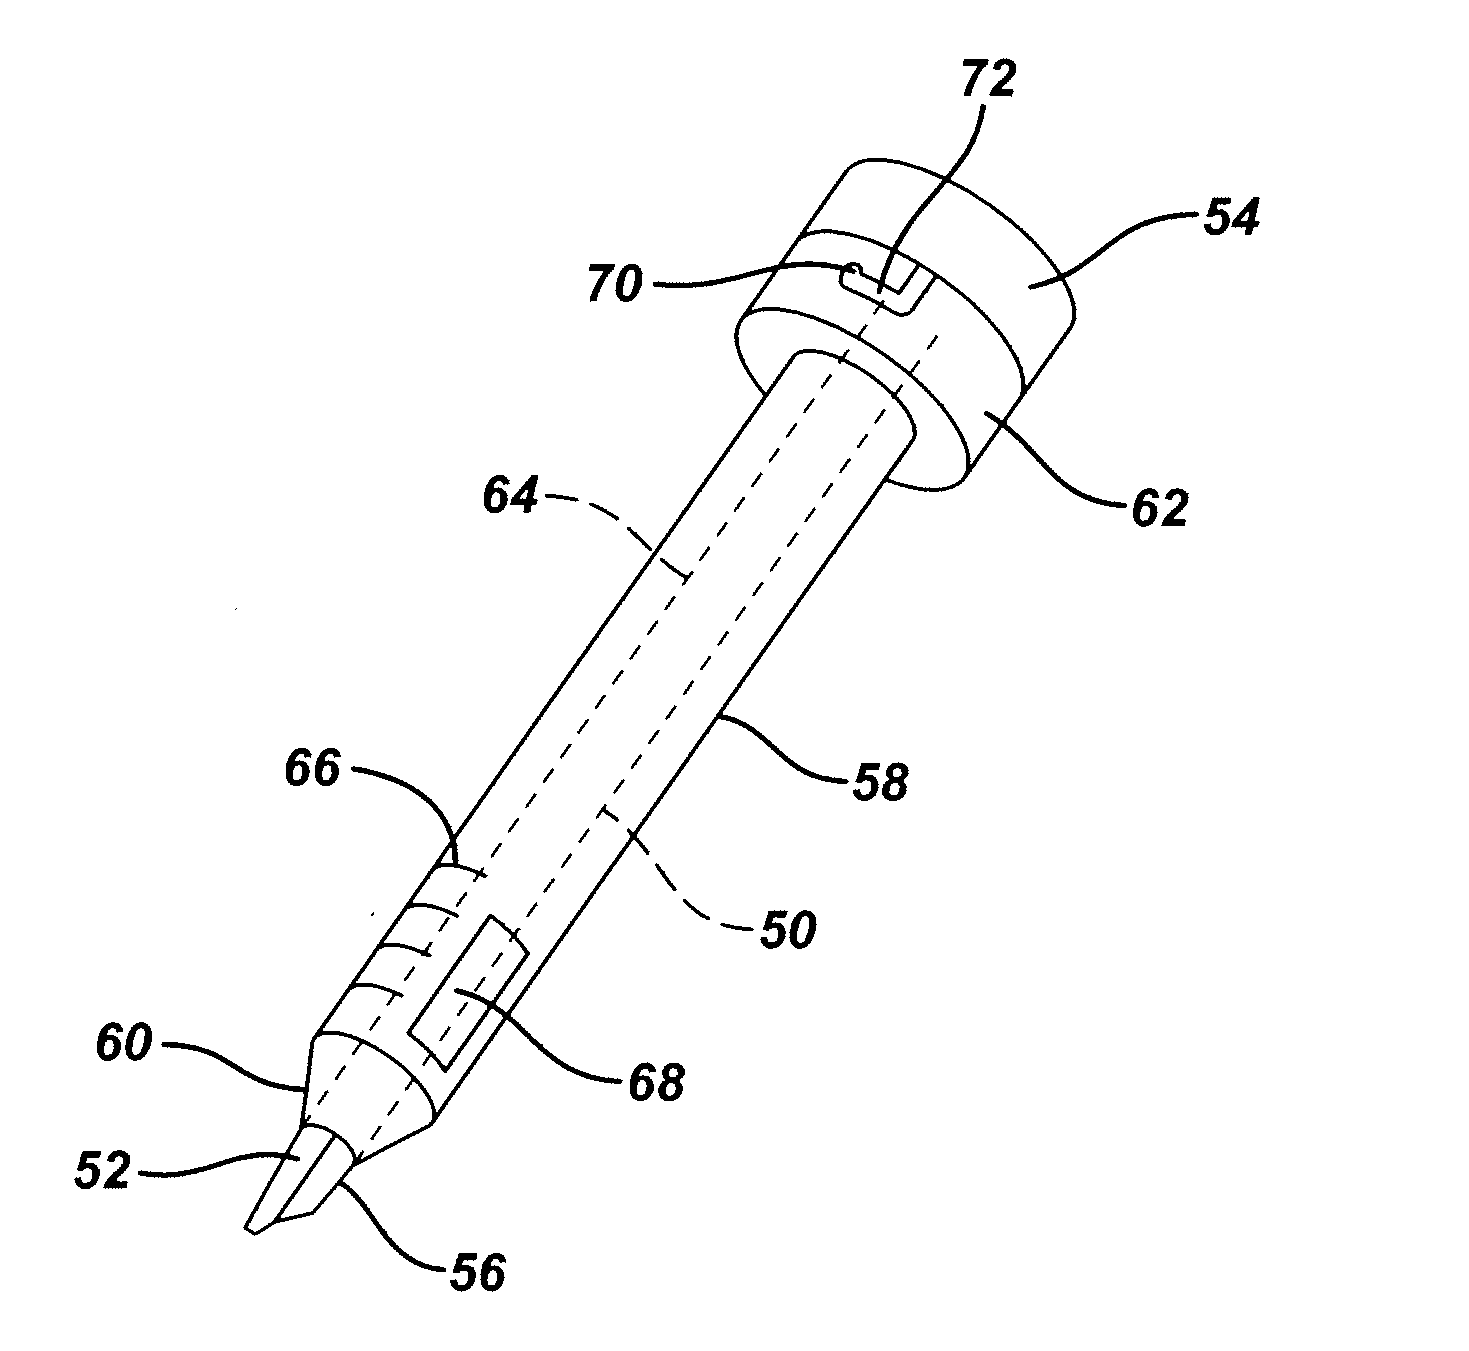 Dual cannula system and method for partial thickness rotator cuff repair